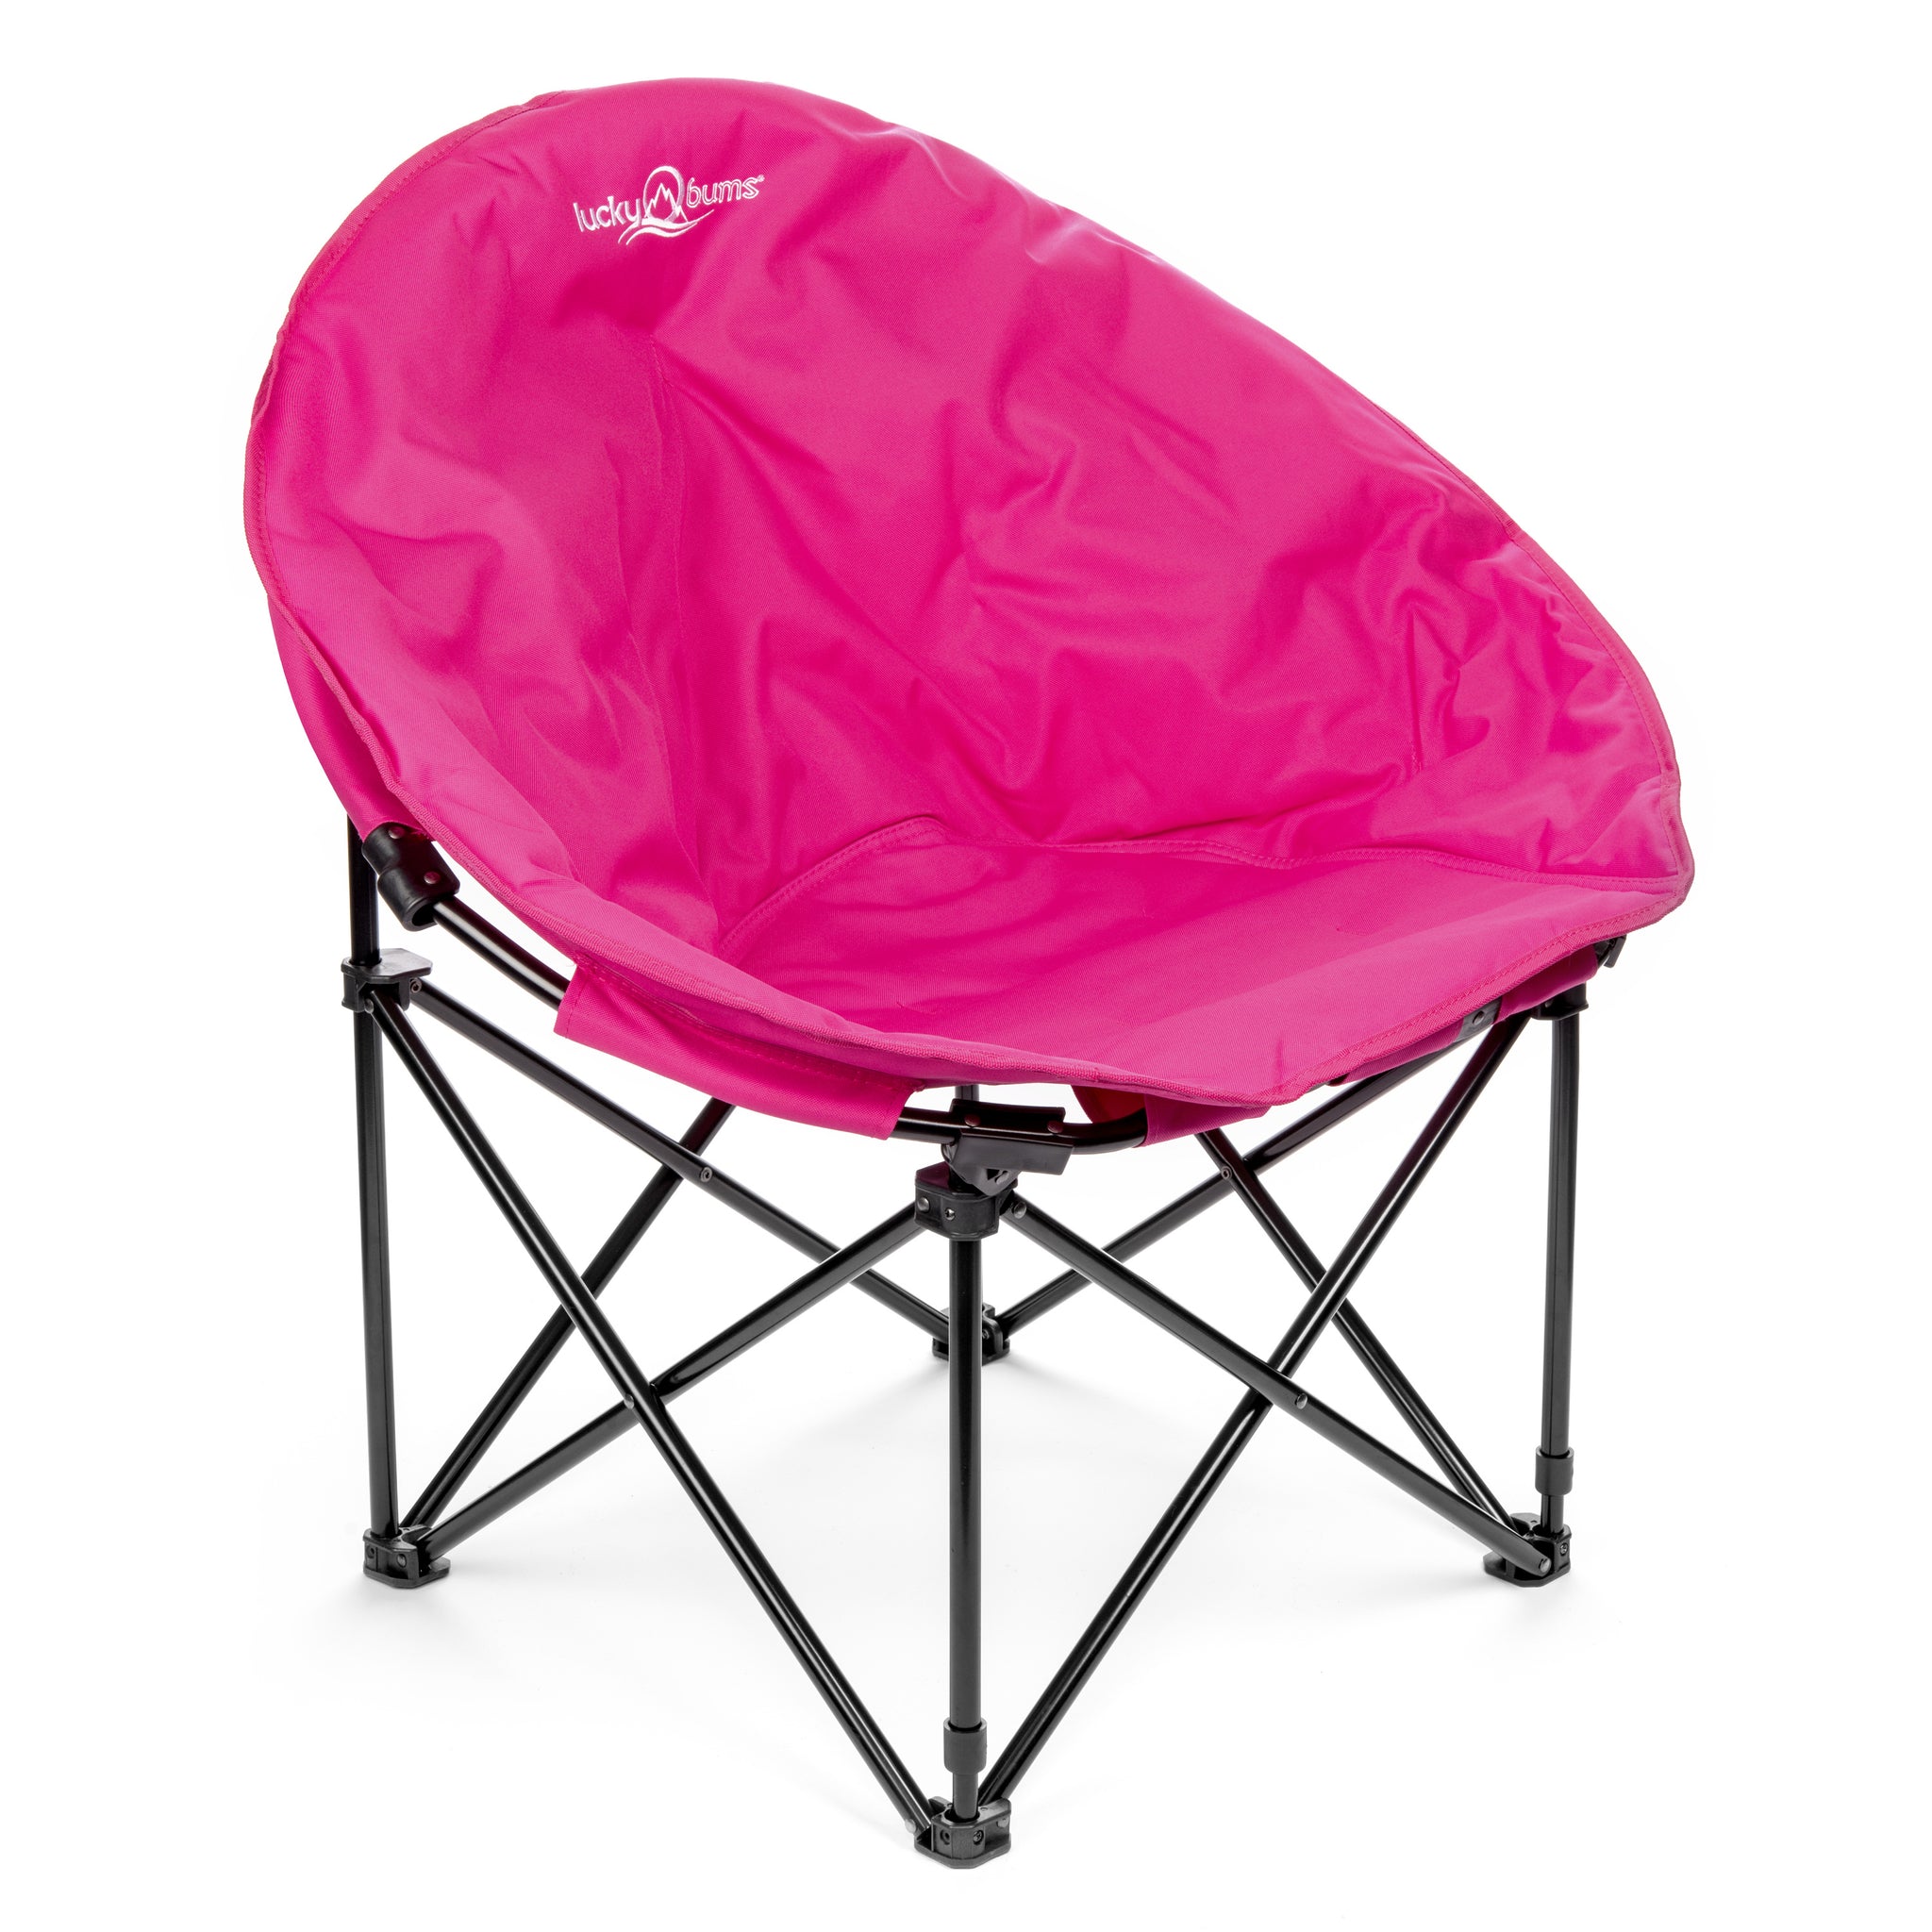 moon chair camping